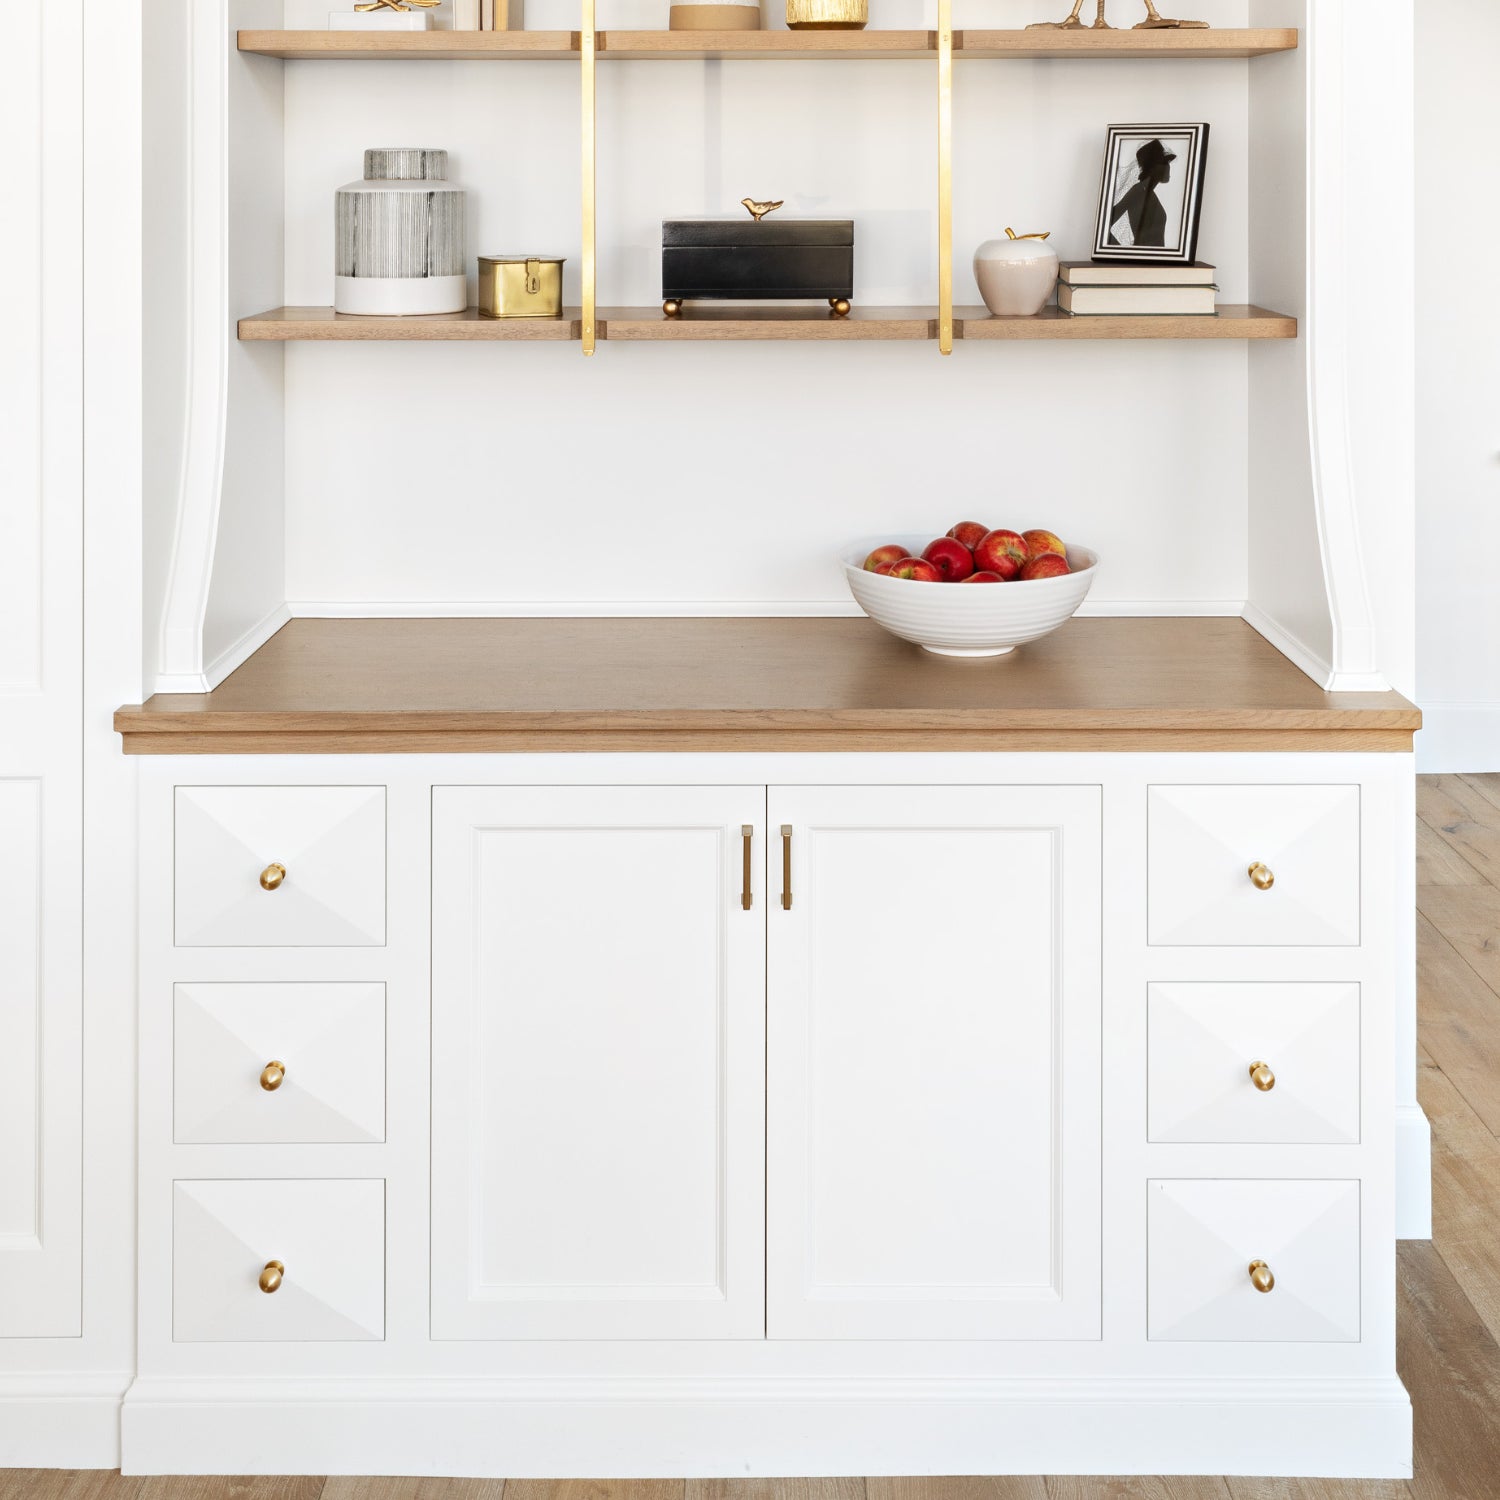 Elegant white sideboard cabinet with gold handles, set below wooden shelves adorned with chic home decor.